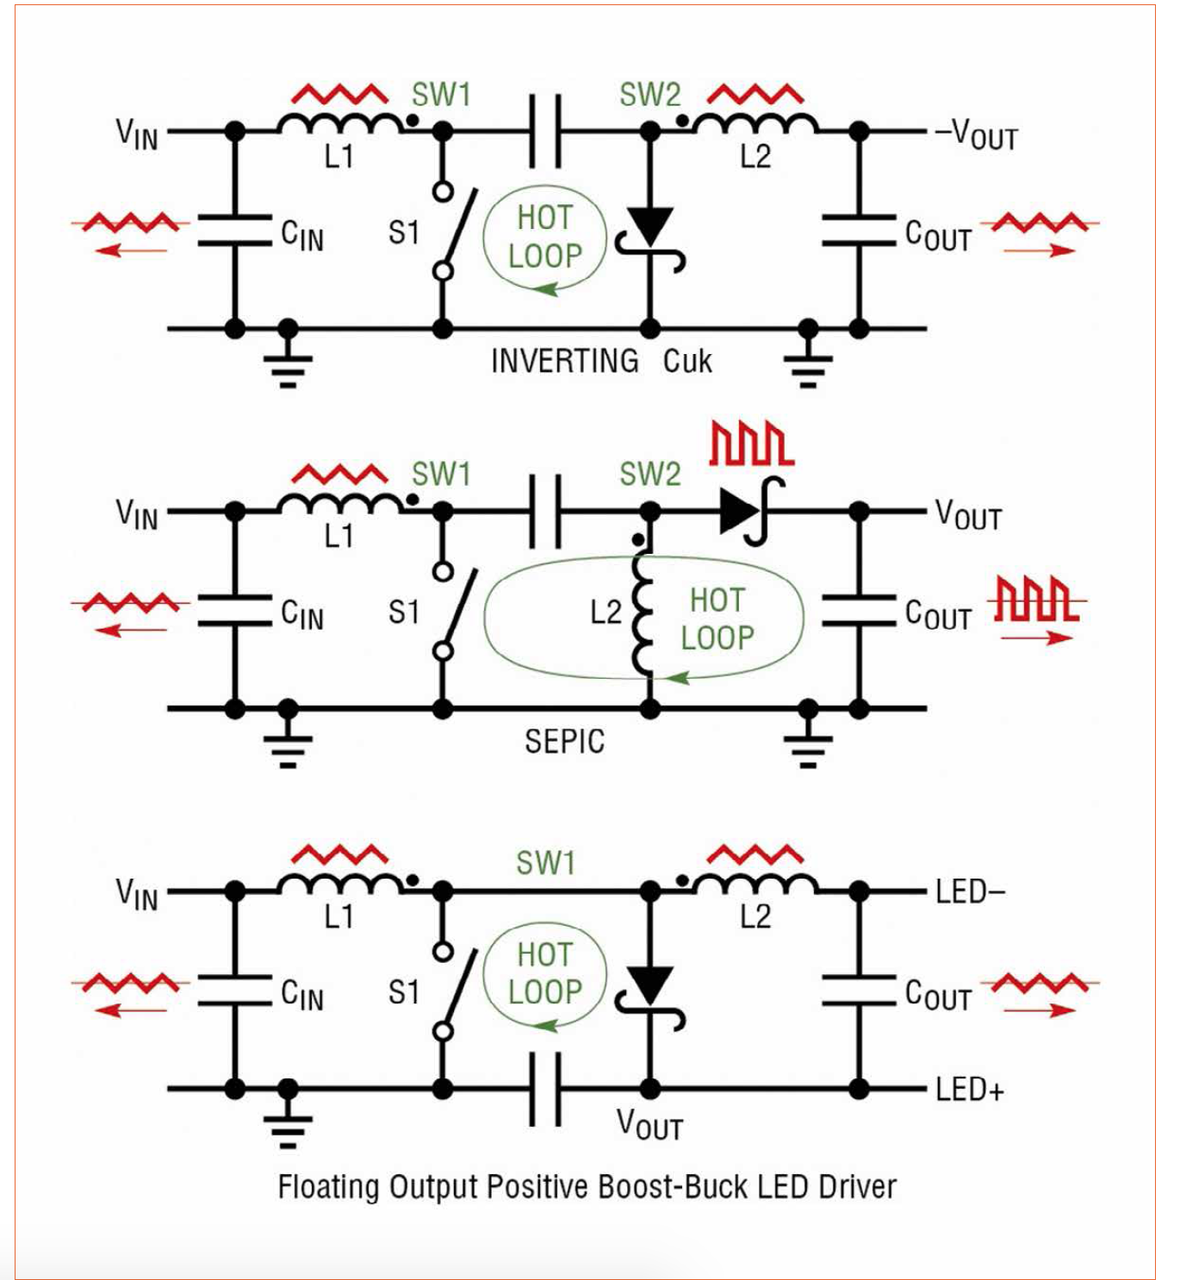 hensynsfuld Burma Pompeji Boost-Buck LED Driver Topology for Low Input and Output Ripple for Low EMI  by Linear Technology — LED professional - LED Lighting Technology,  Application Magazine